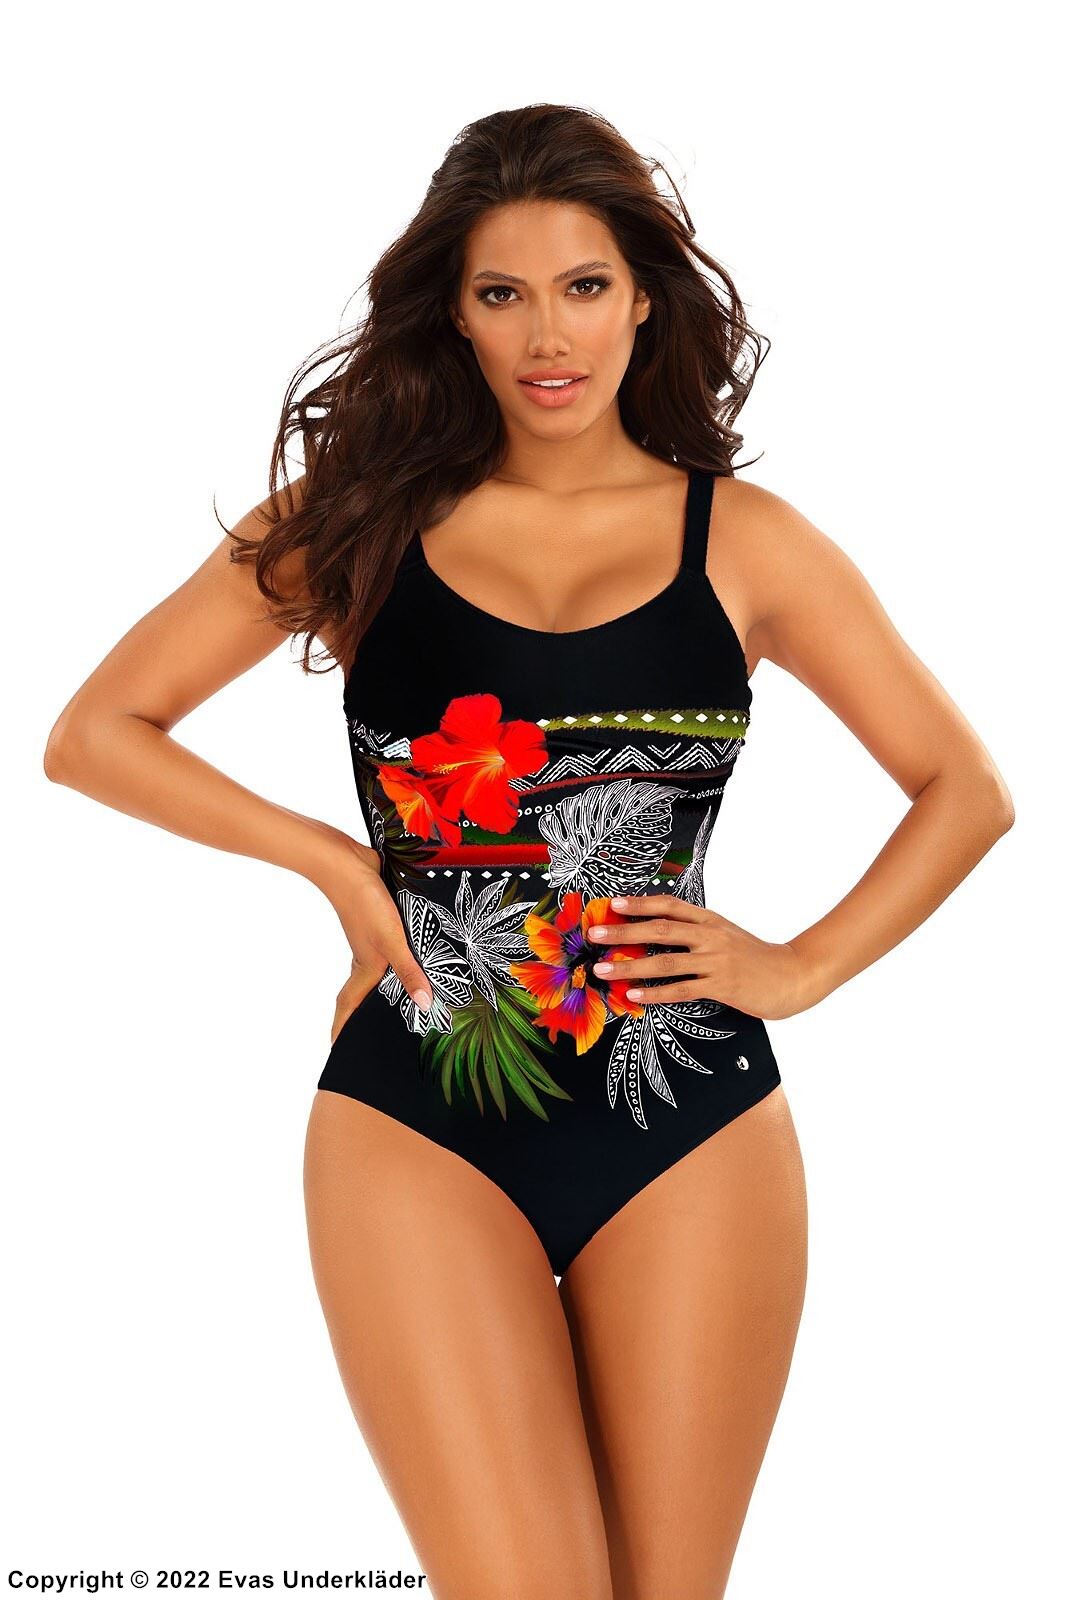 One-piece swimsuit, high quality microfiber, tropical pattern